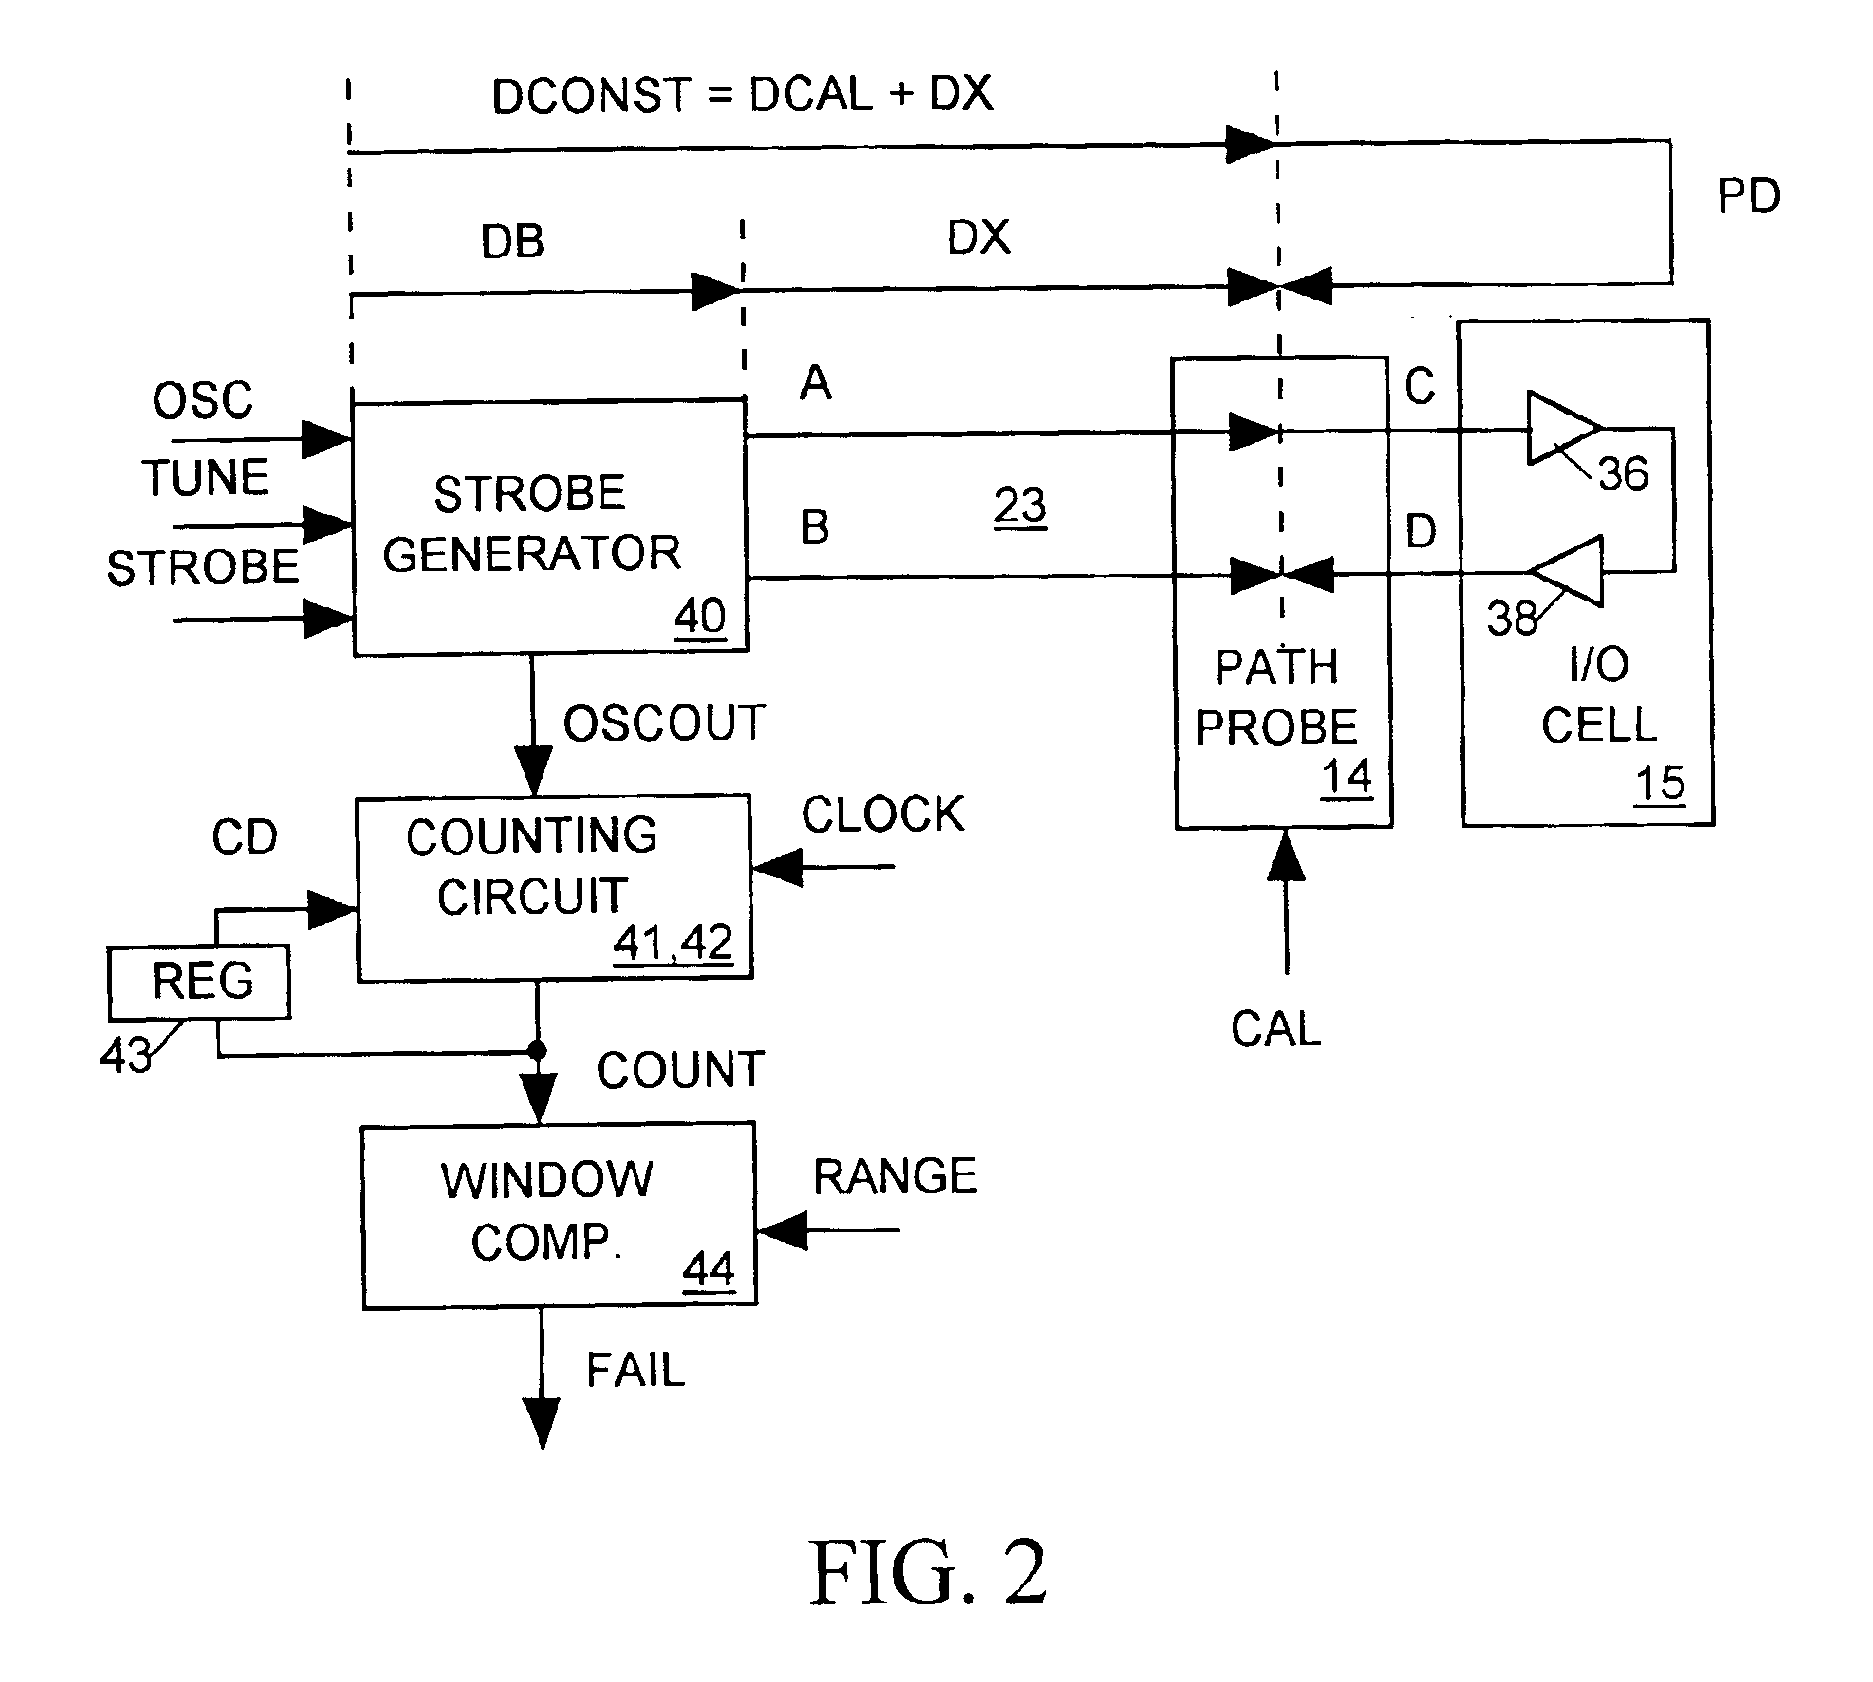 BIST circuit for measuring path delay in an IC